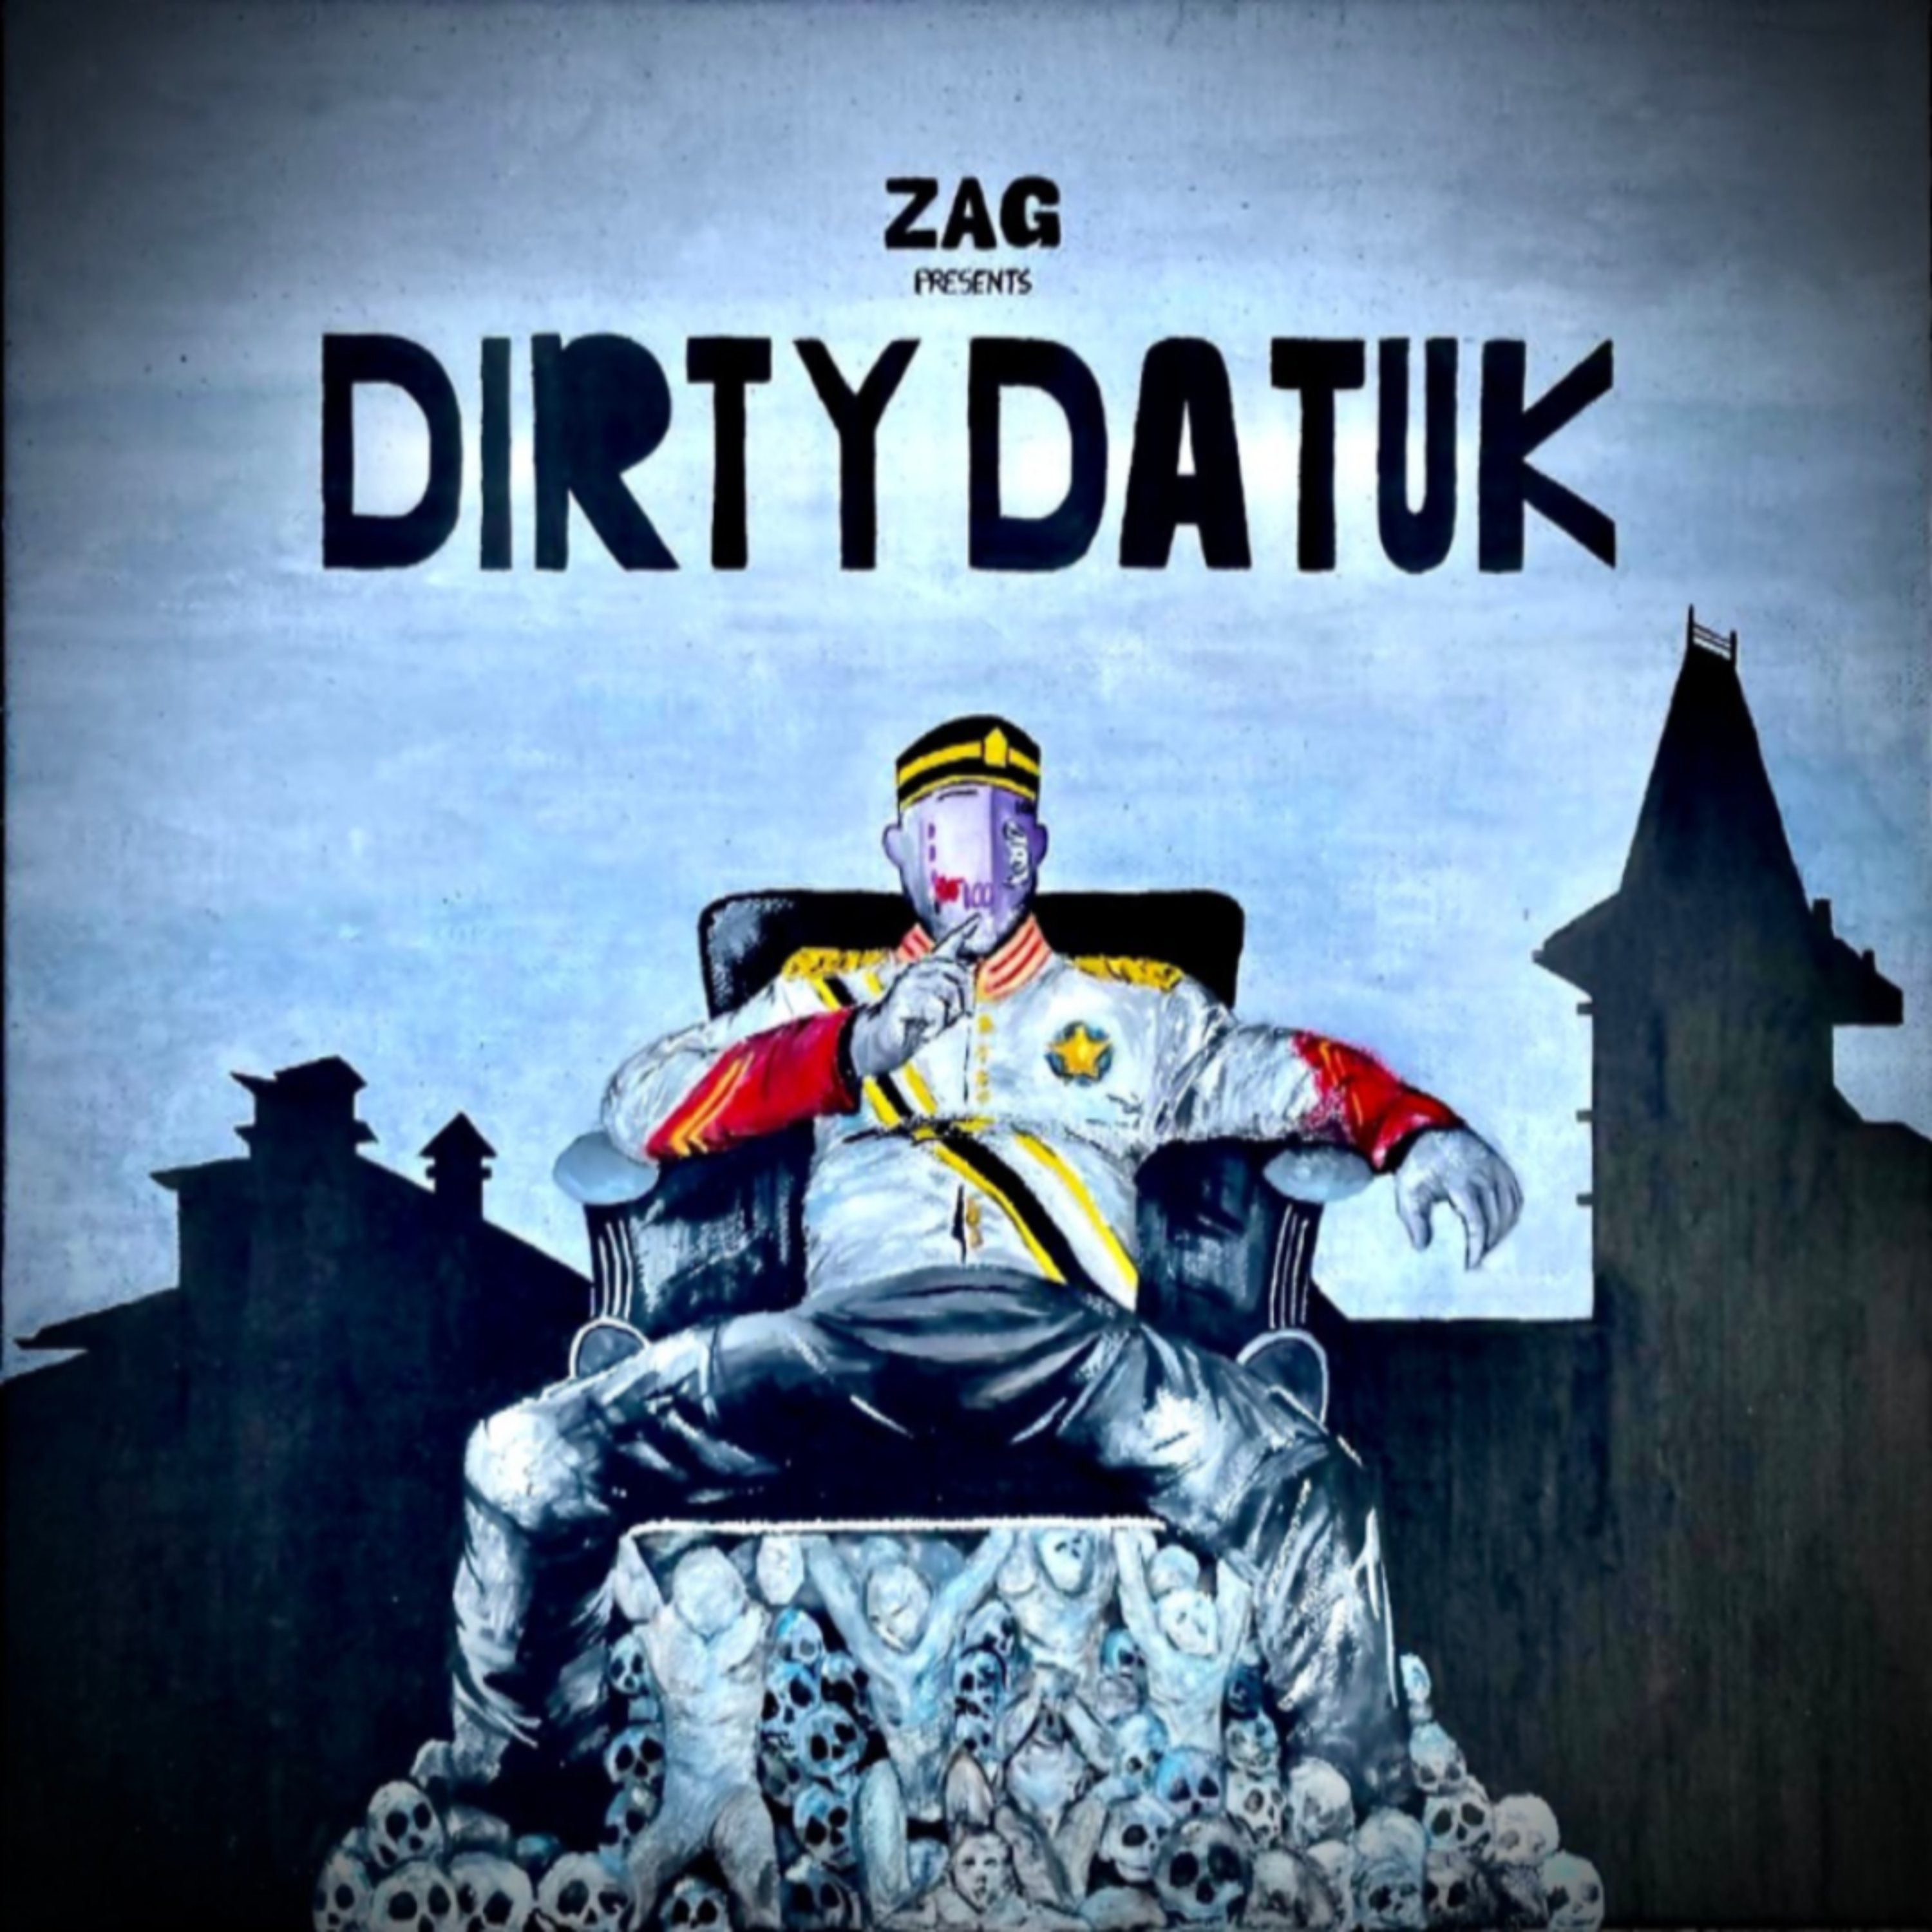 DIRTY DATUK EP4: THE SUGARBABY